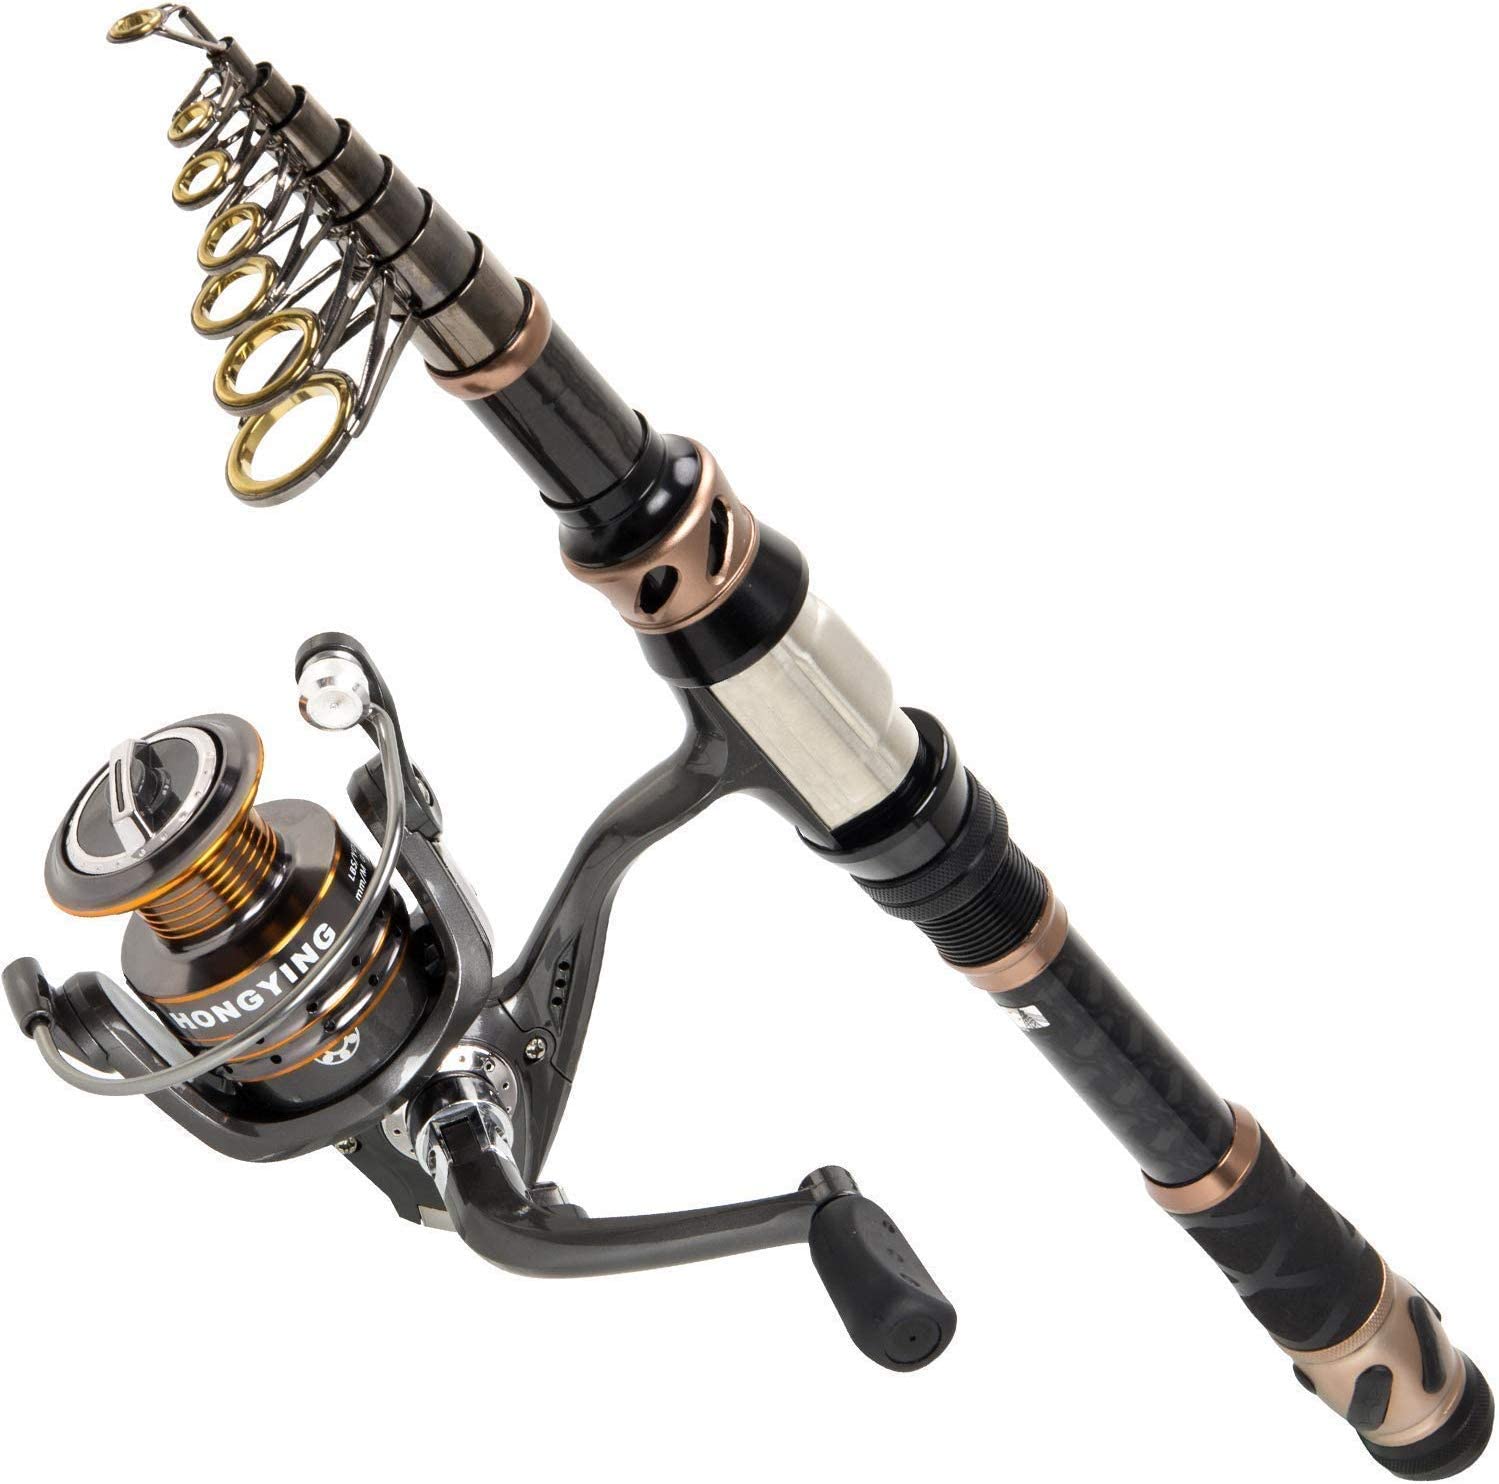 Carbon Fiber Spinning Fishing Rod and Reel Combo Hand Pole Spinning Reel Set 